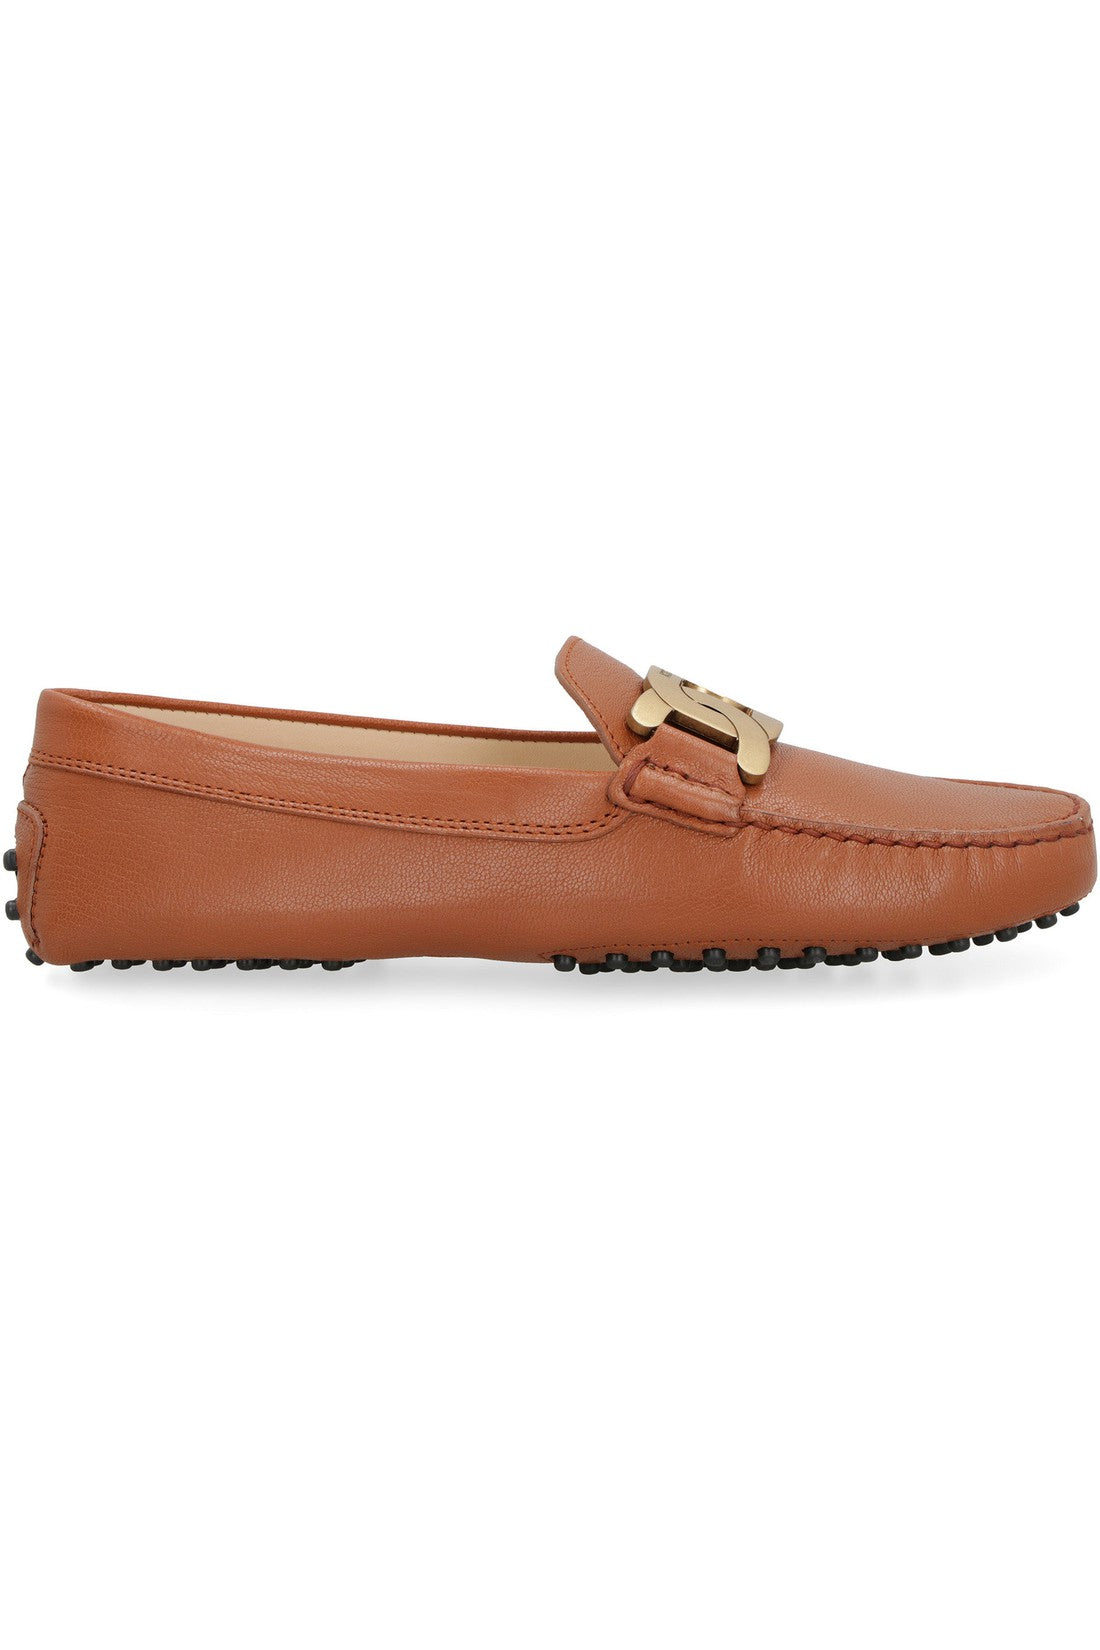 Tod's-OUTLET-SALE-Gommini leather loafers-ARCHIVIST